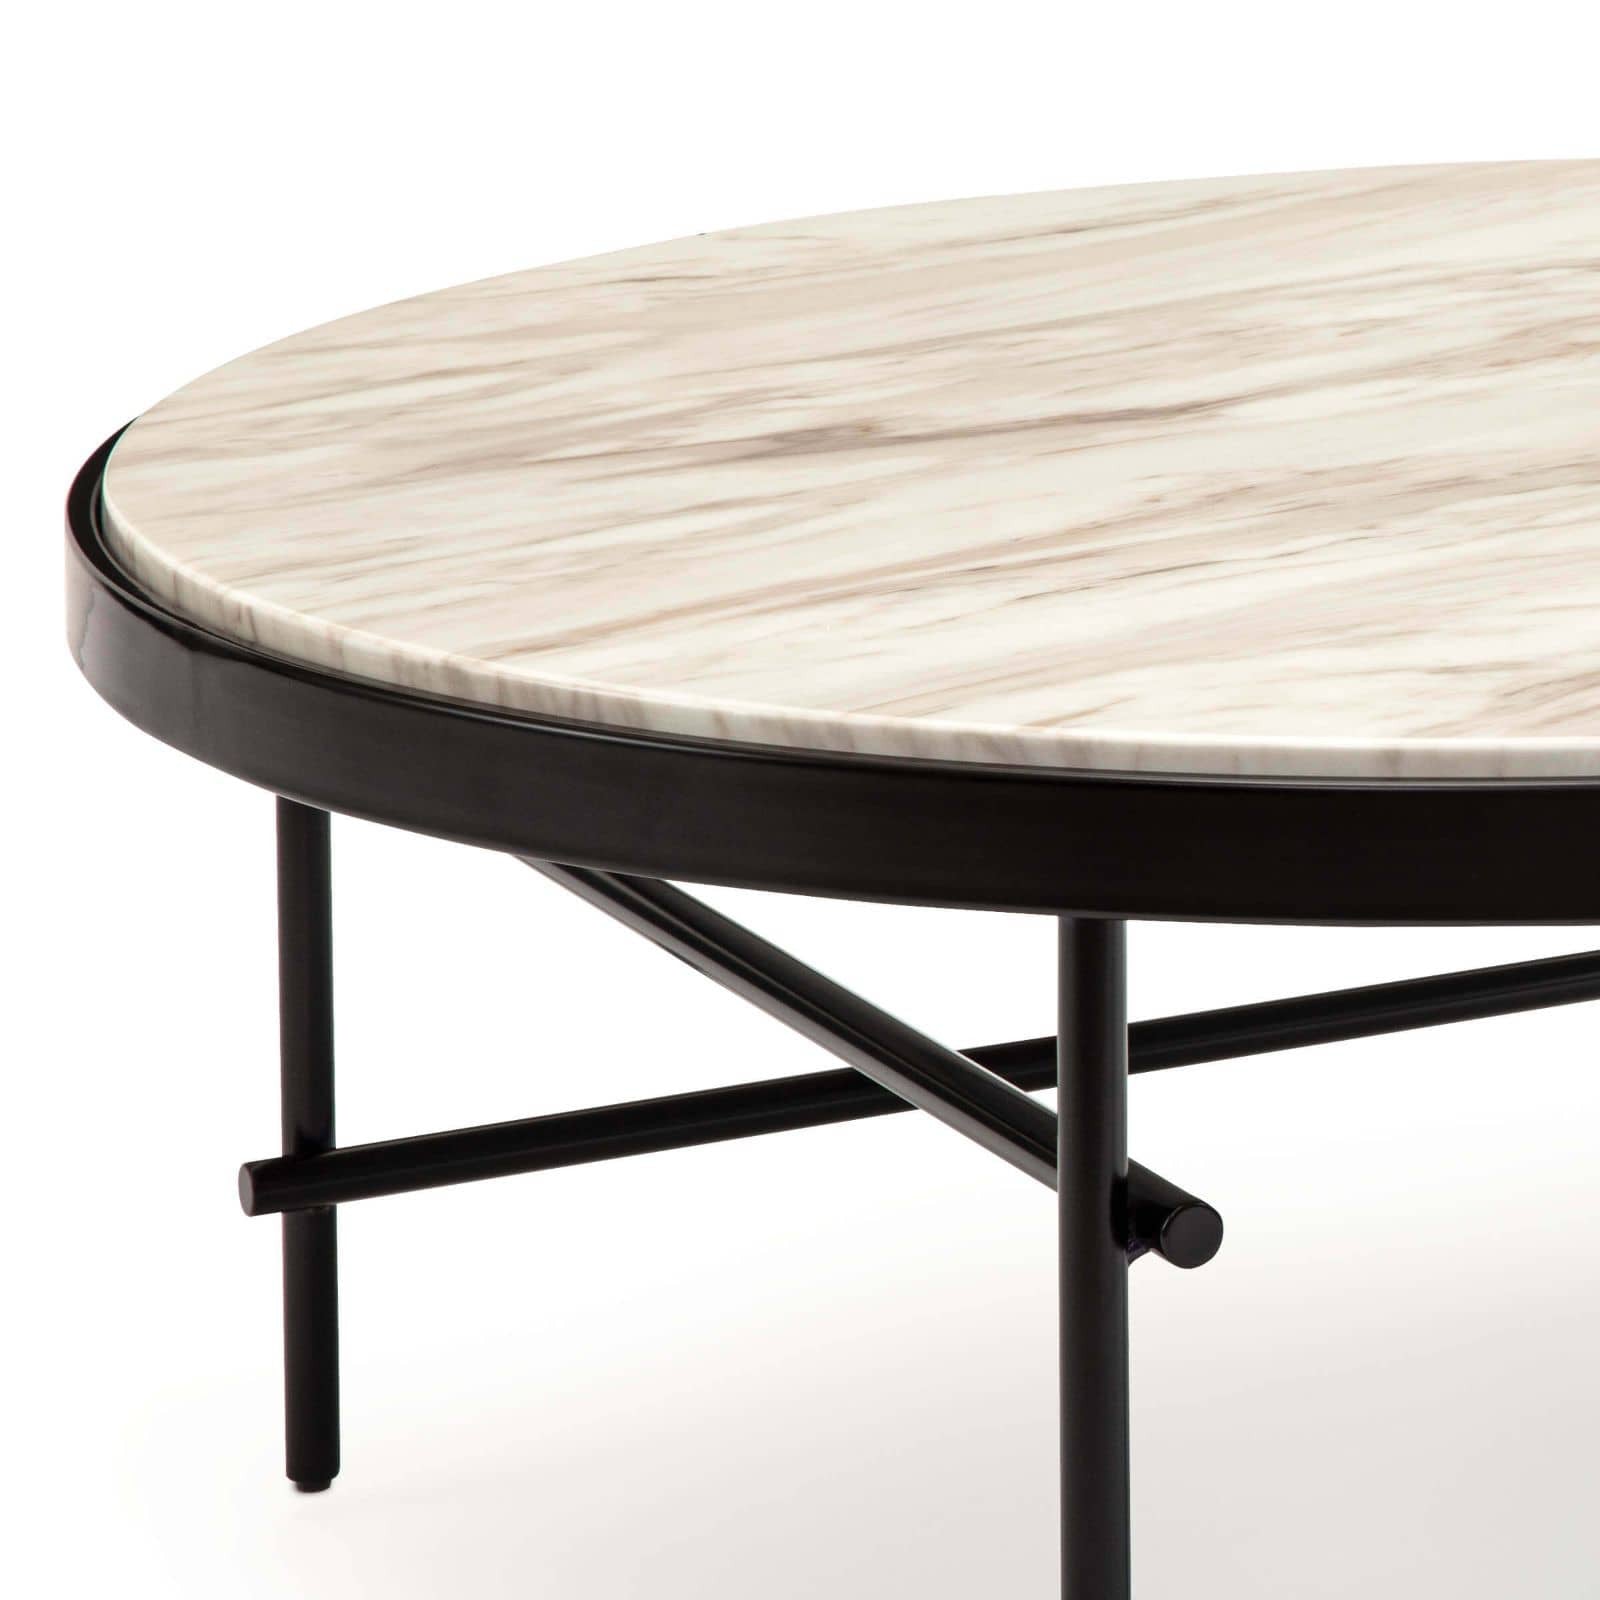 We love the creamy marble top matched with the blacked iron frame on this Cesario Coffee Table. A sophisticated, modern piece to add to your living room or lounge area.    Overall size: 39"w x 39"d x 16"h